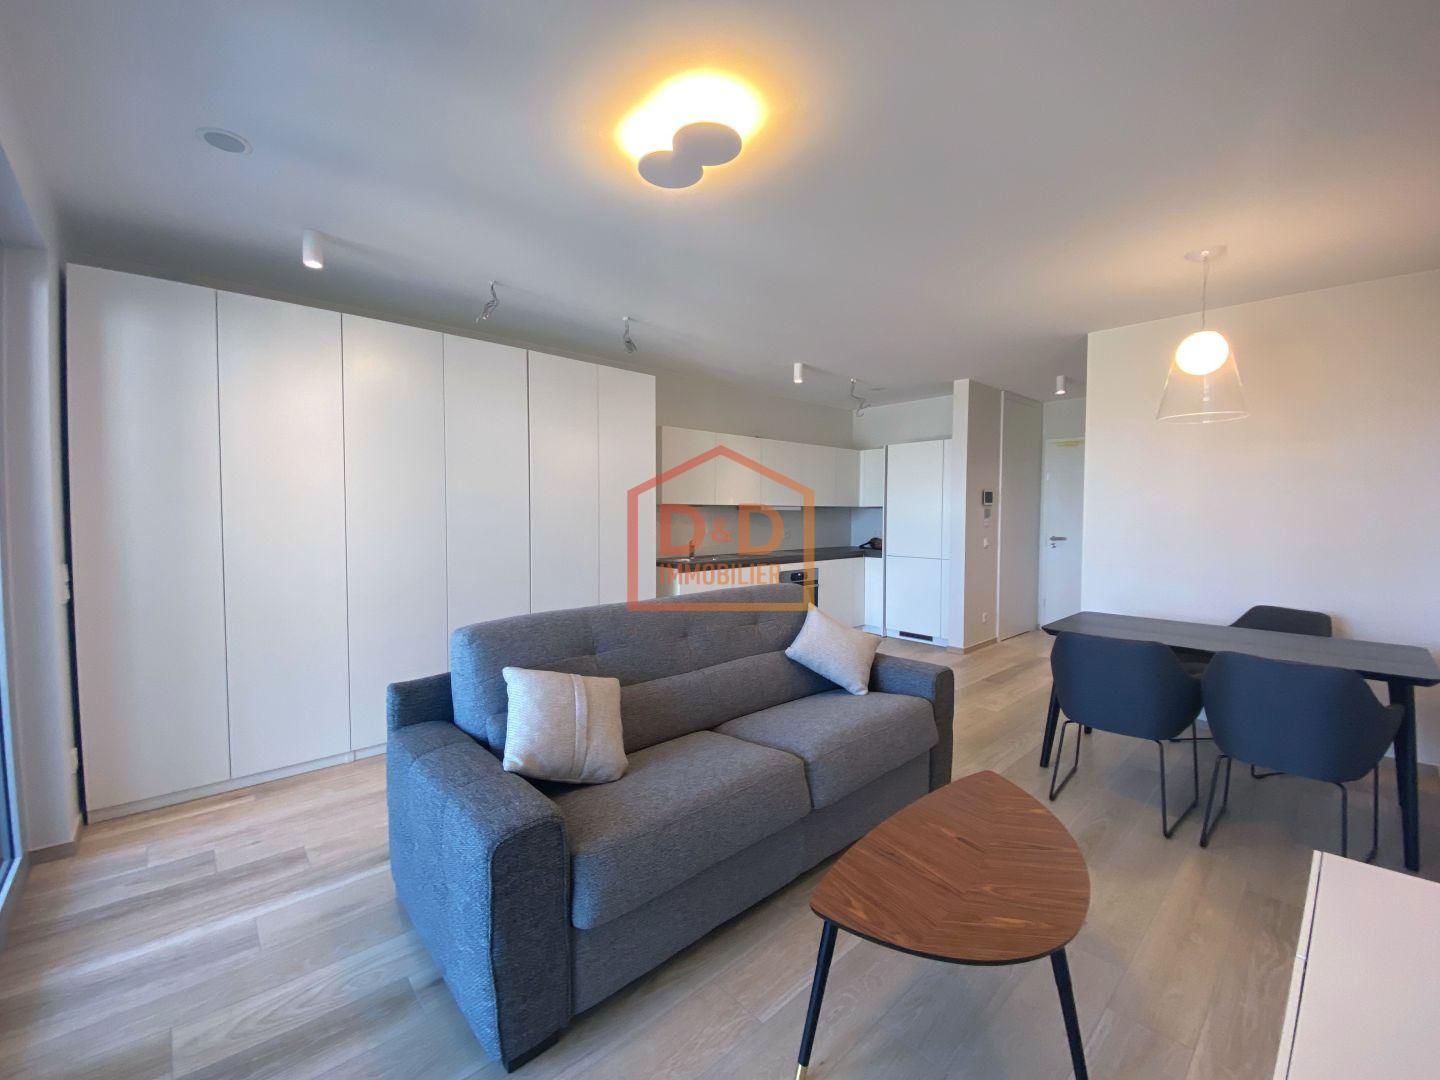 Appartement à Luxembourg, 38 m², 1 550 €/mois